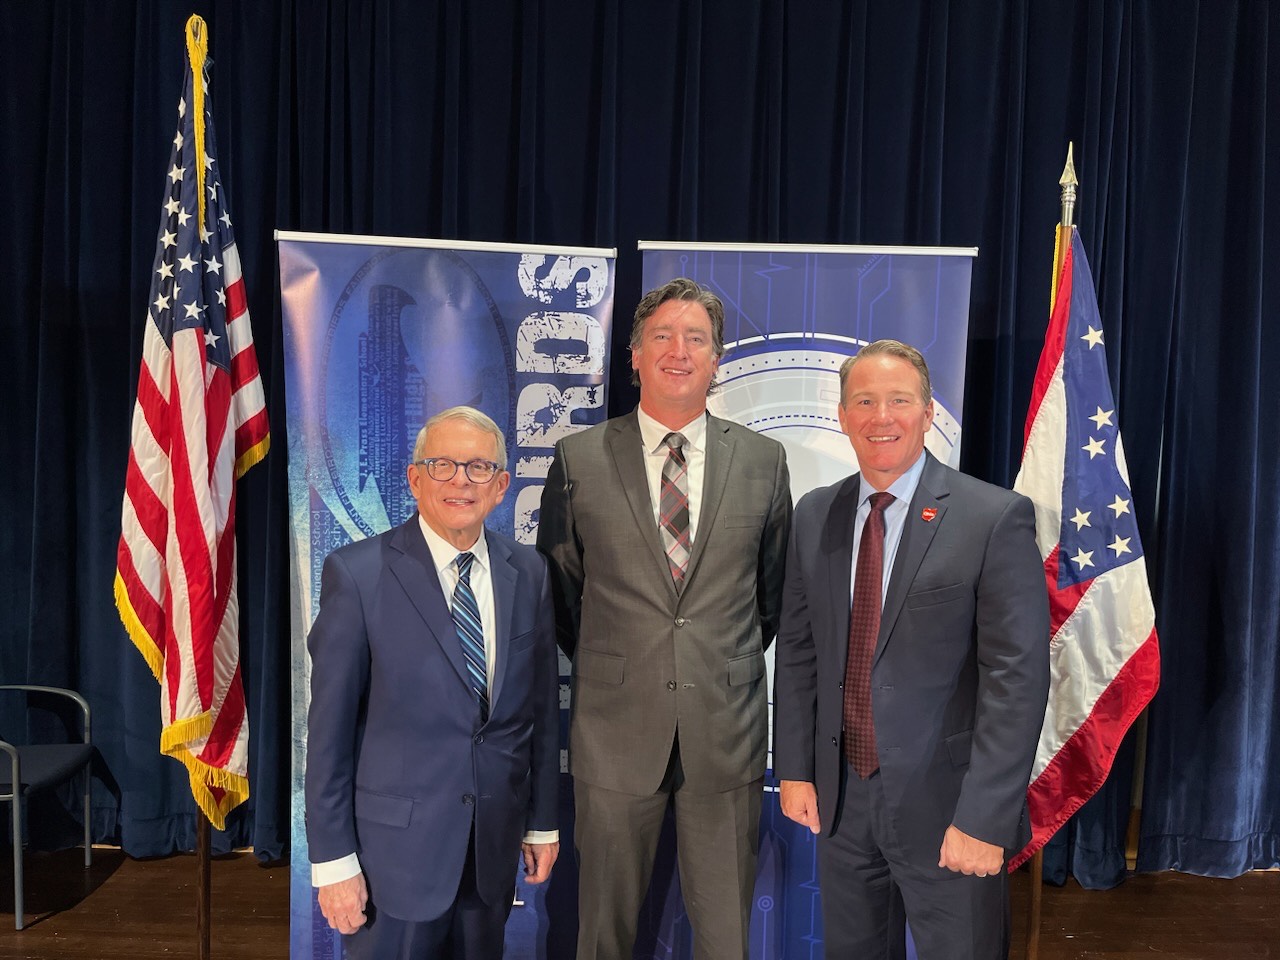 Photo of Superintendent Tom Larkin with the Ohio Governor and Lt. Governor